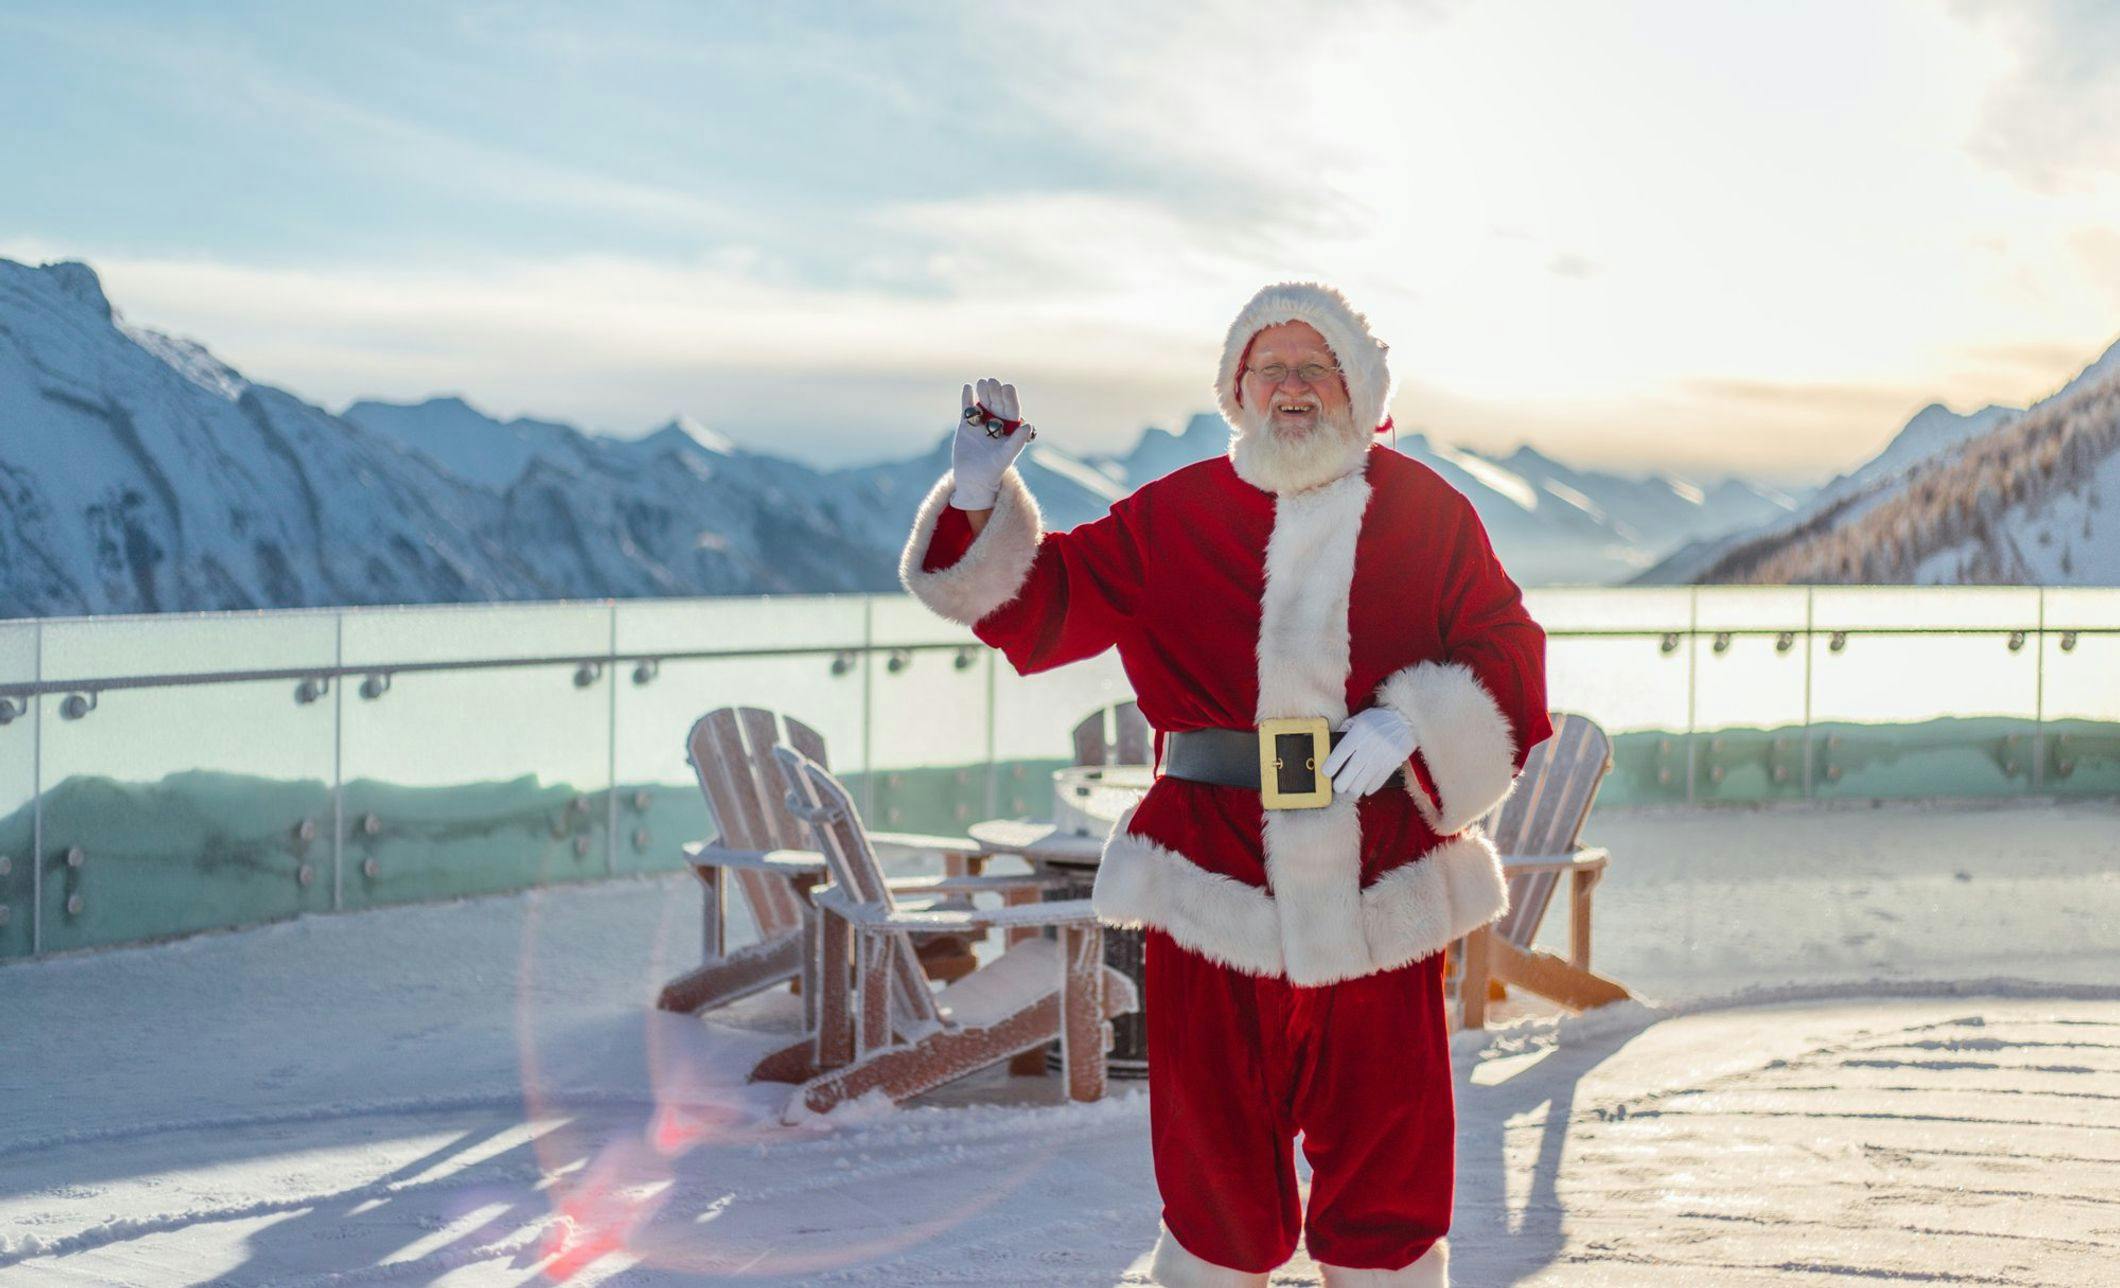 Santa Claus poses on a viewing platform on a bright winter day with mountaintops visible in the background